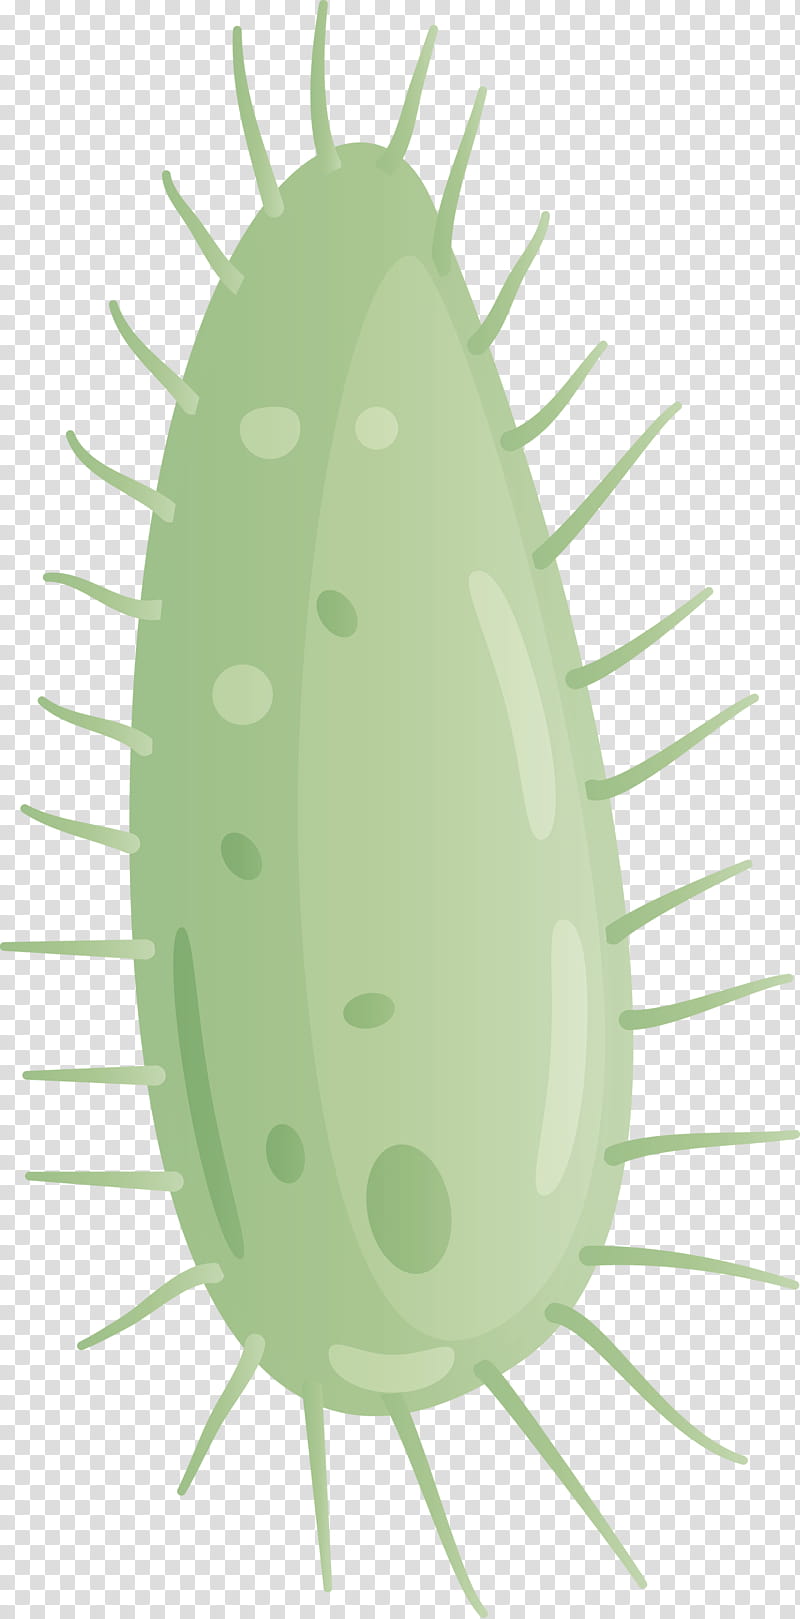 Virus, Plant, Insect, Cucumis, Oval transparent background PNG clipart